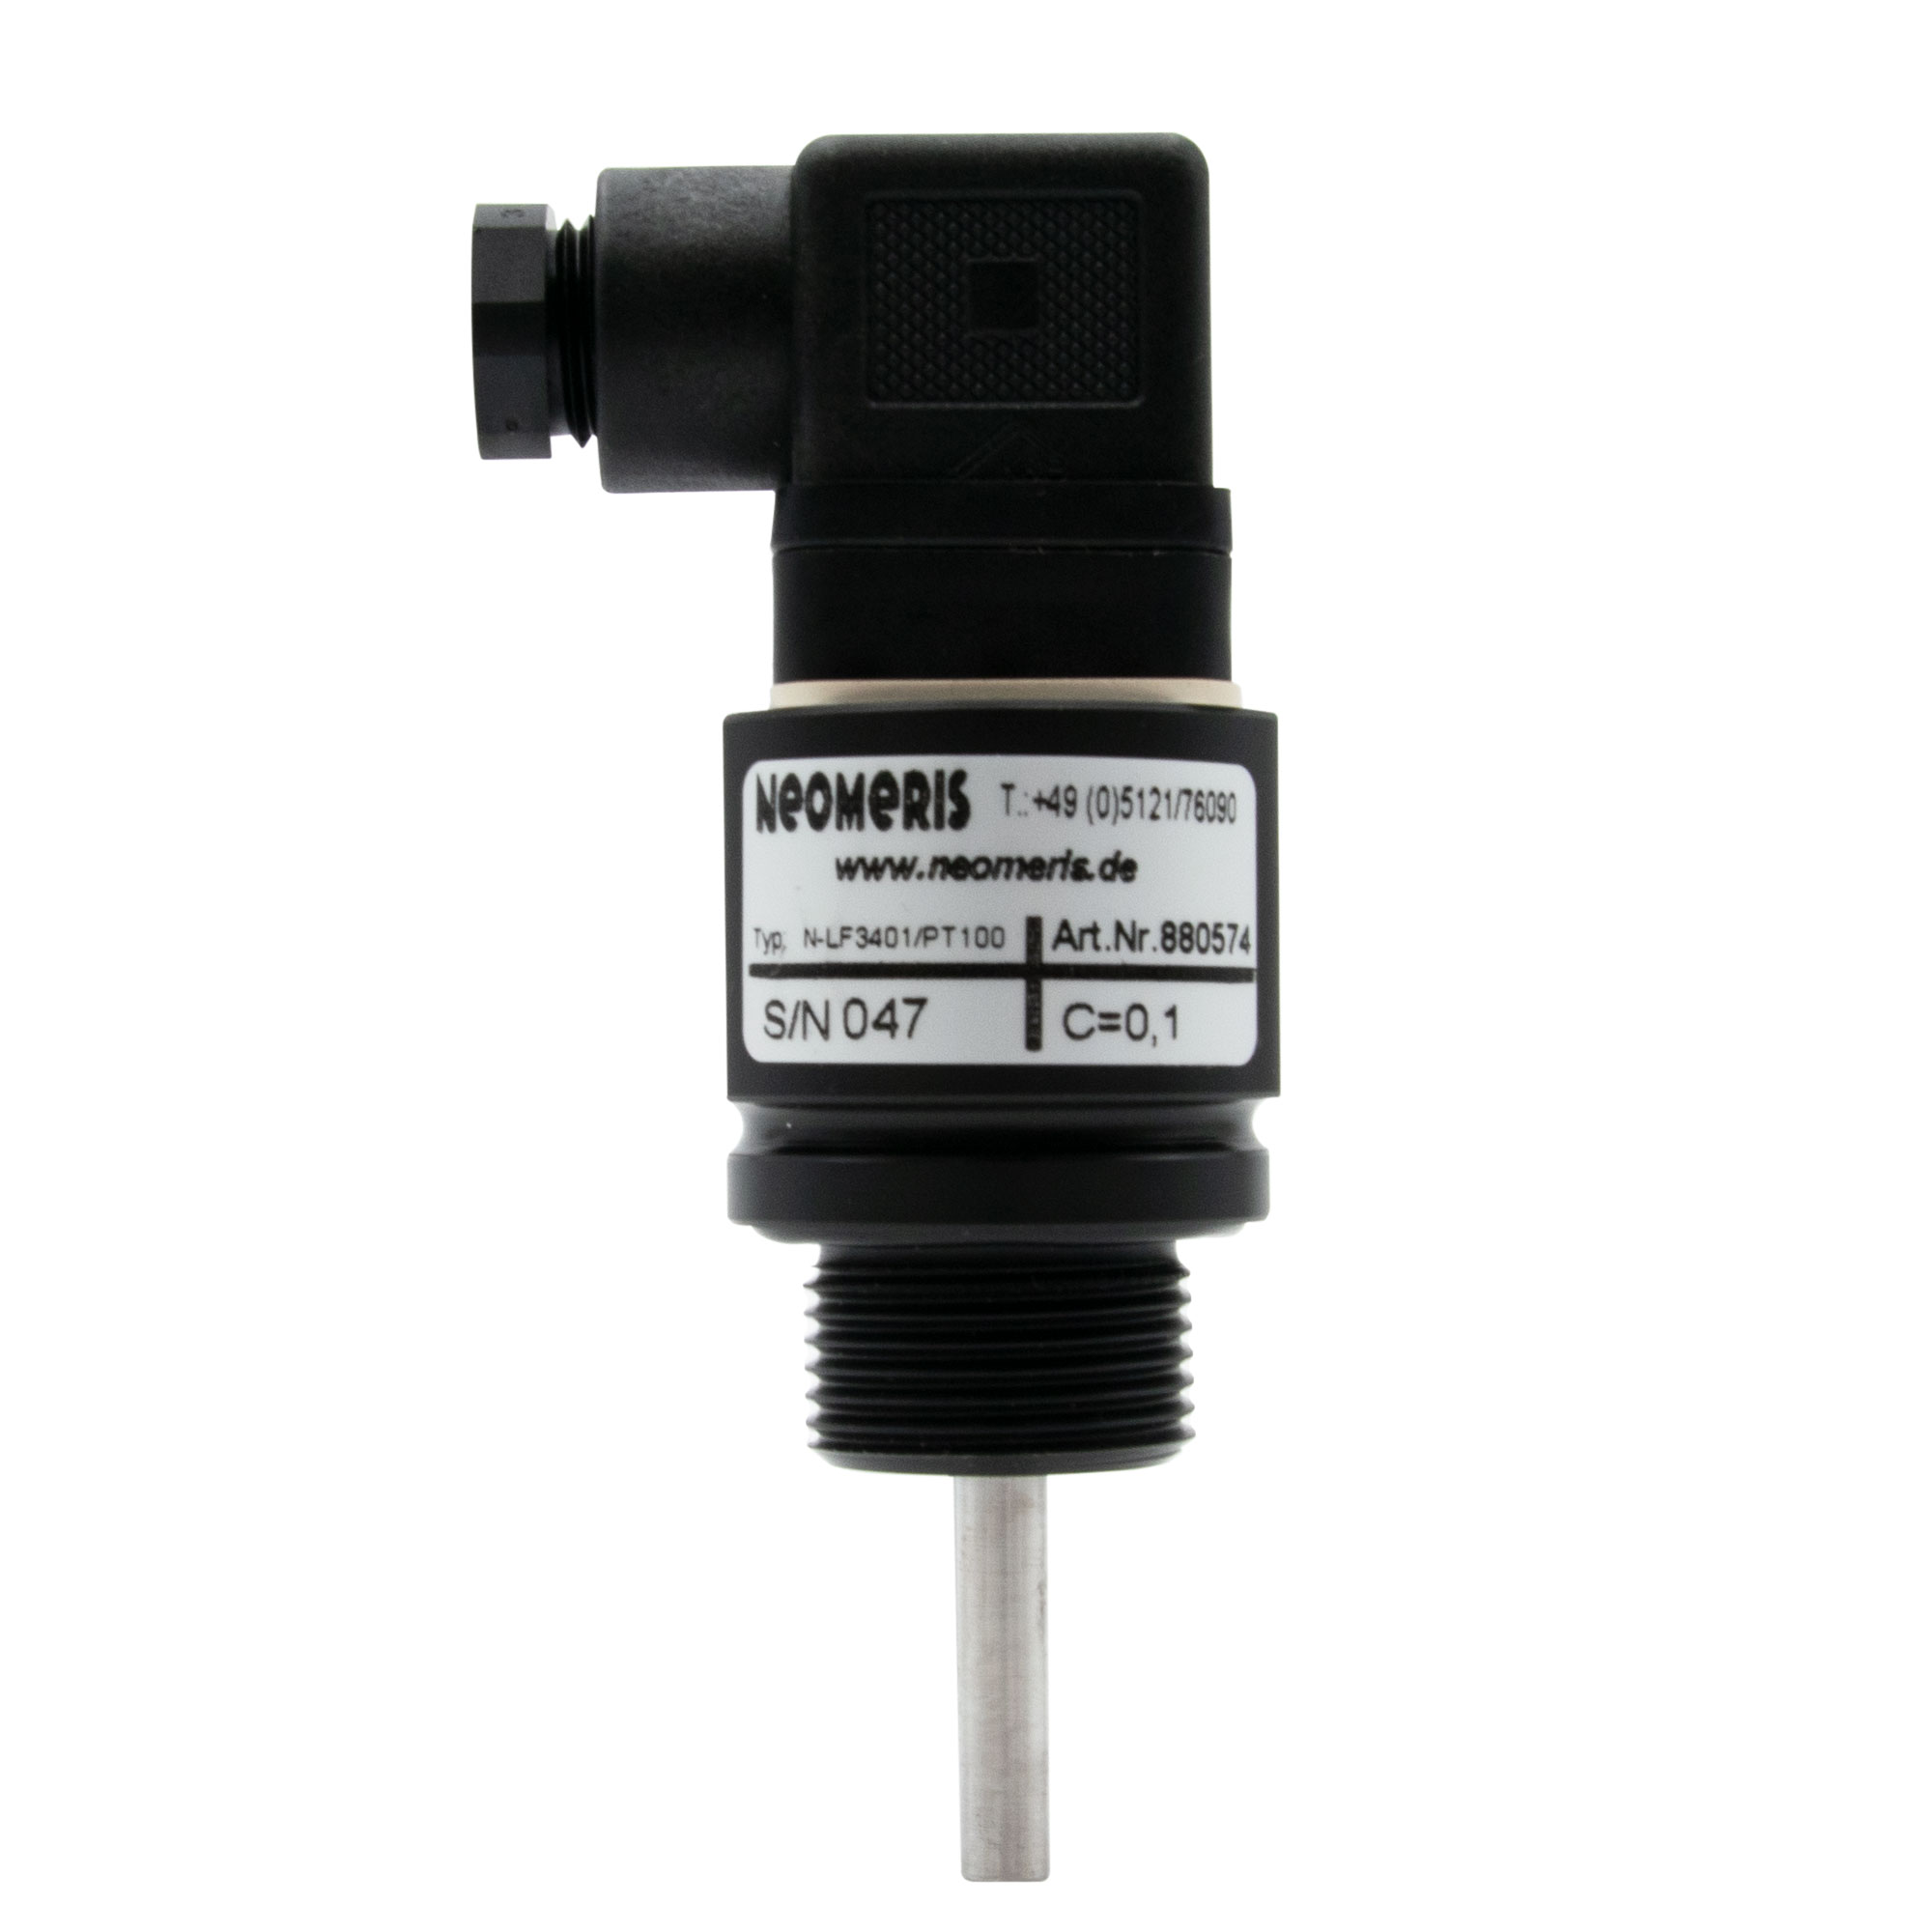 N-LF3401 conductivity measuring cell C=0.1 with PT100, 3/4 inch screw-in cell and solenoid valve connector